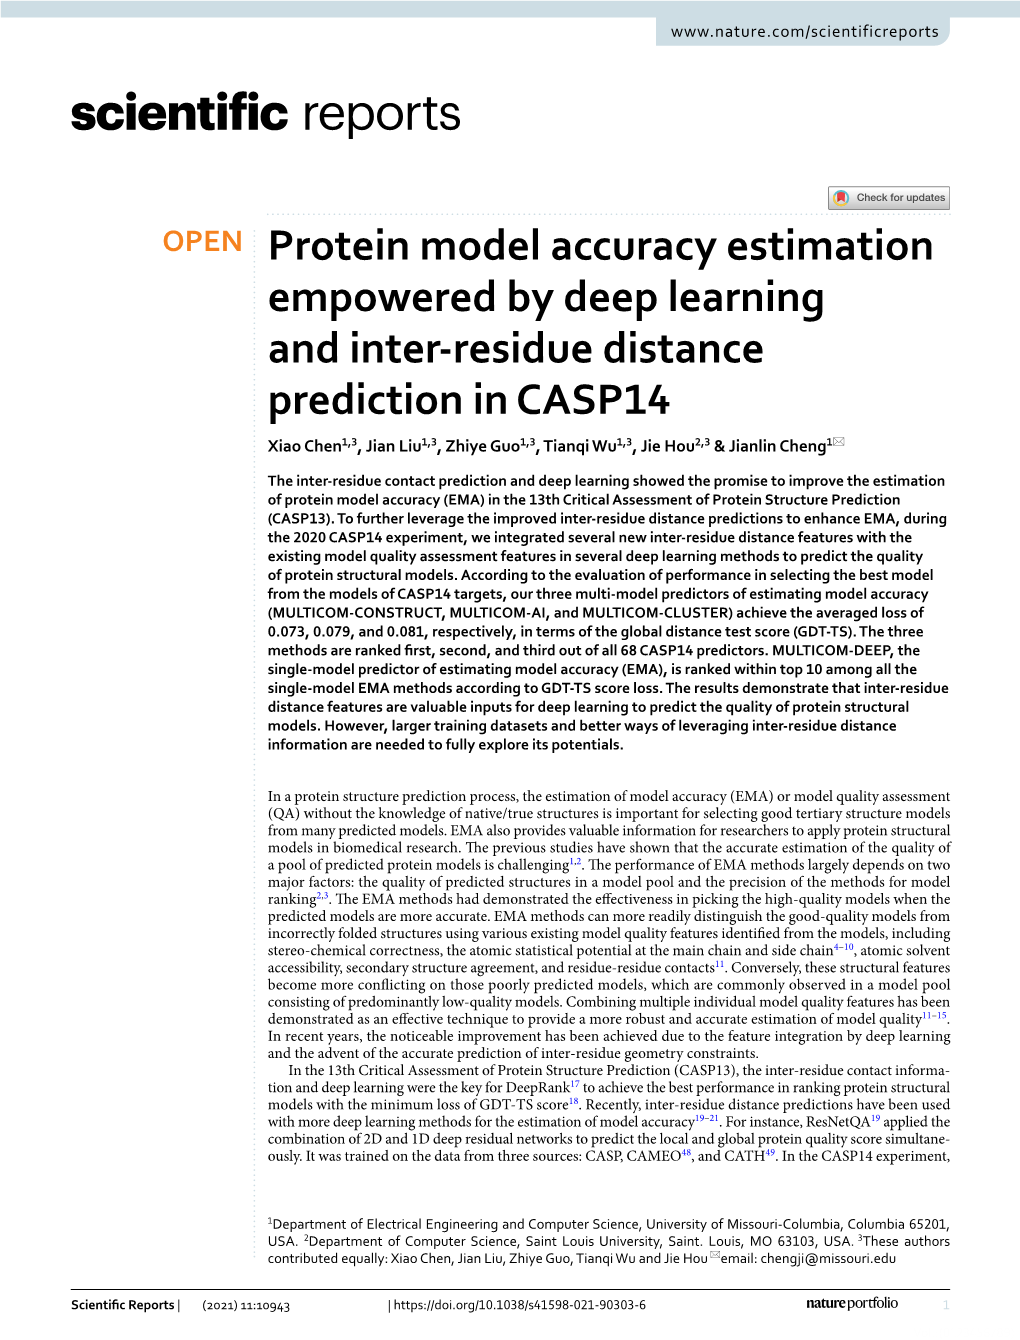 Protein Model Accuracy Estimation Empowered by Deep Learning And